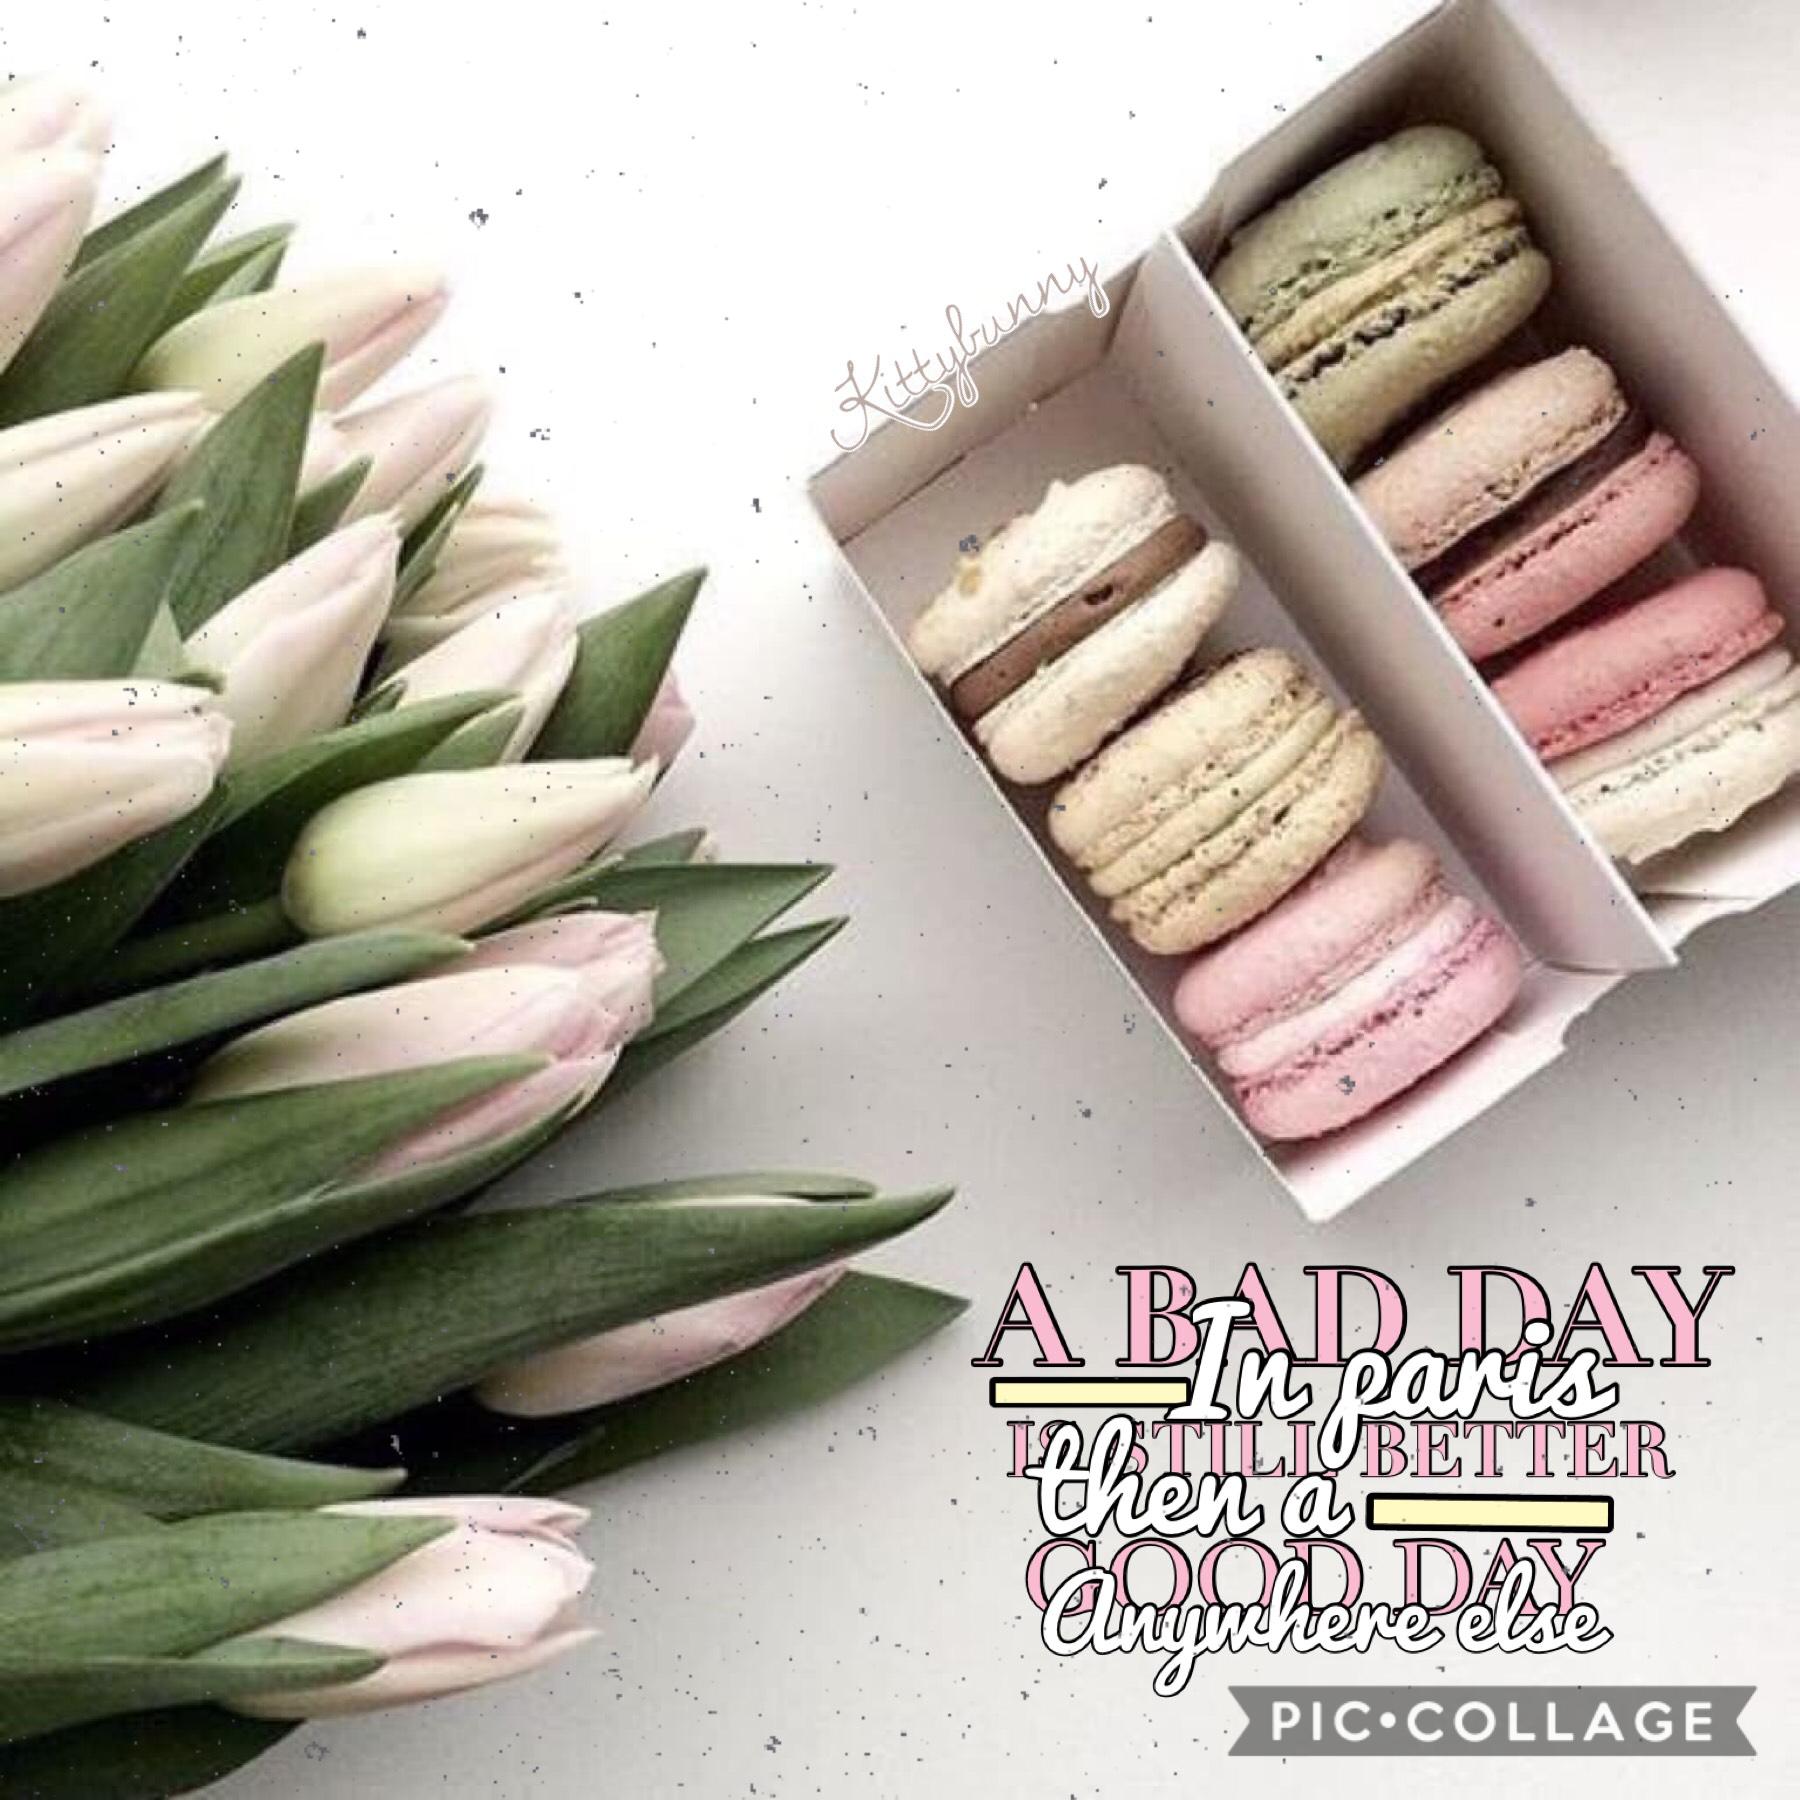 So
🌷what’s you favorite flavor of a macaroon 🌷
🍎Mines fruity pebbles 🍎